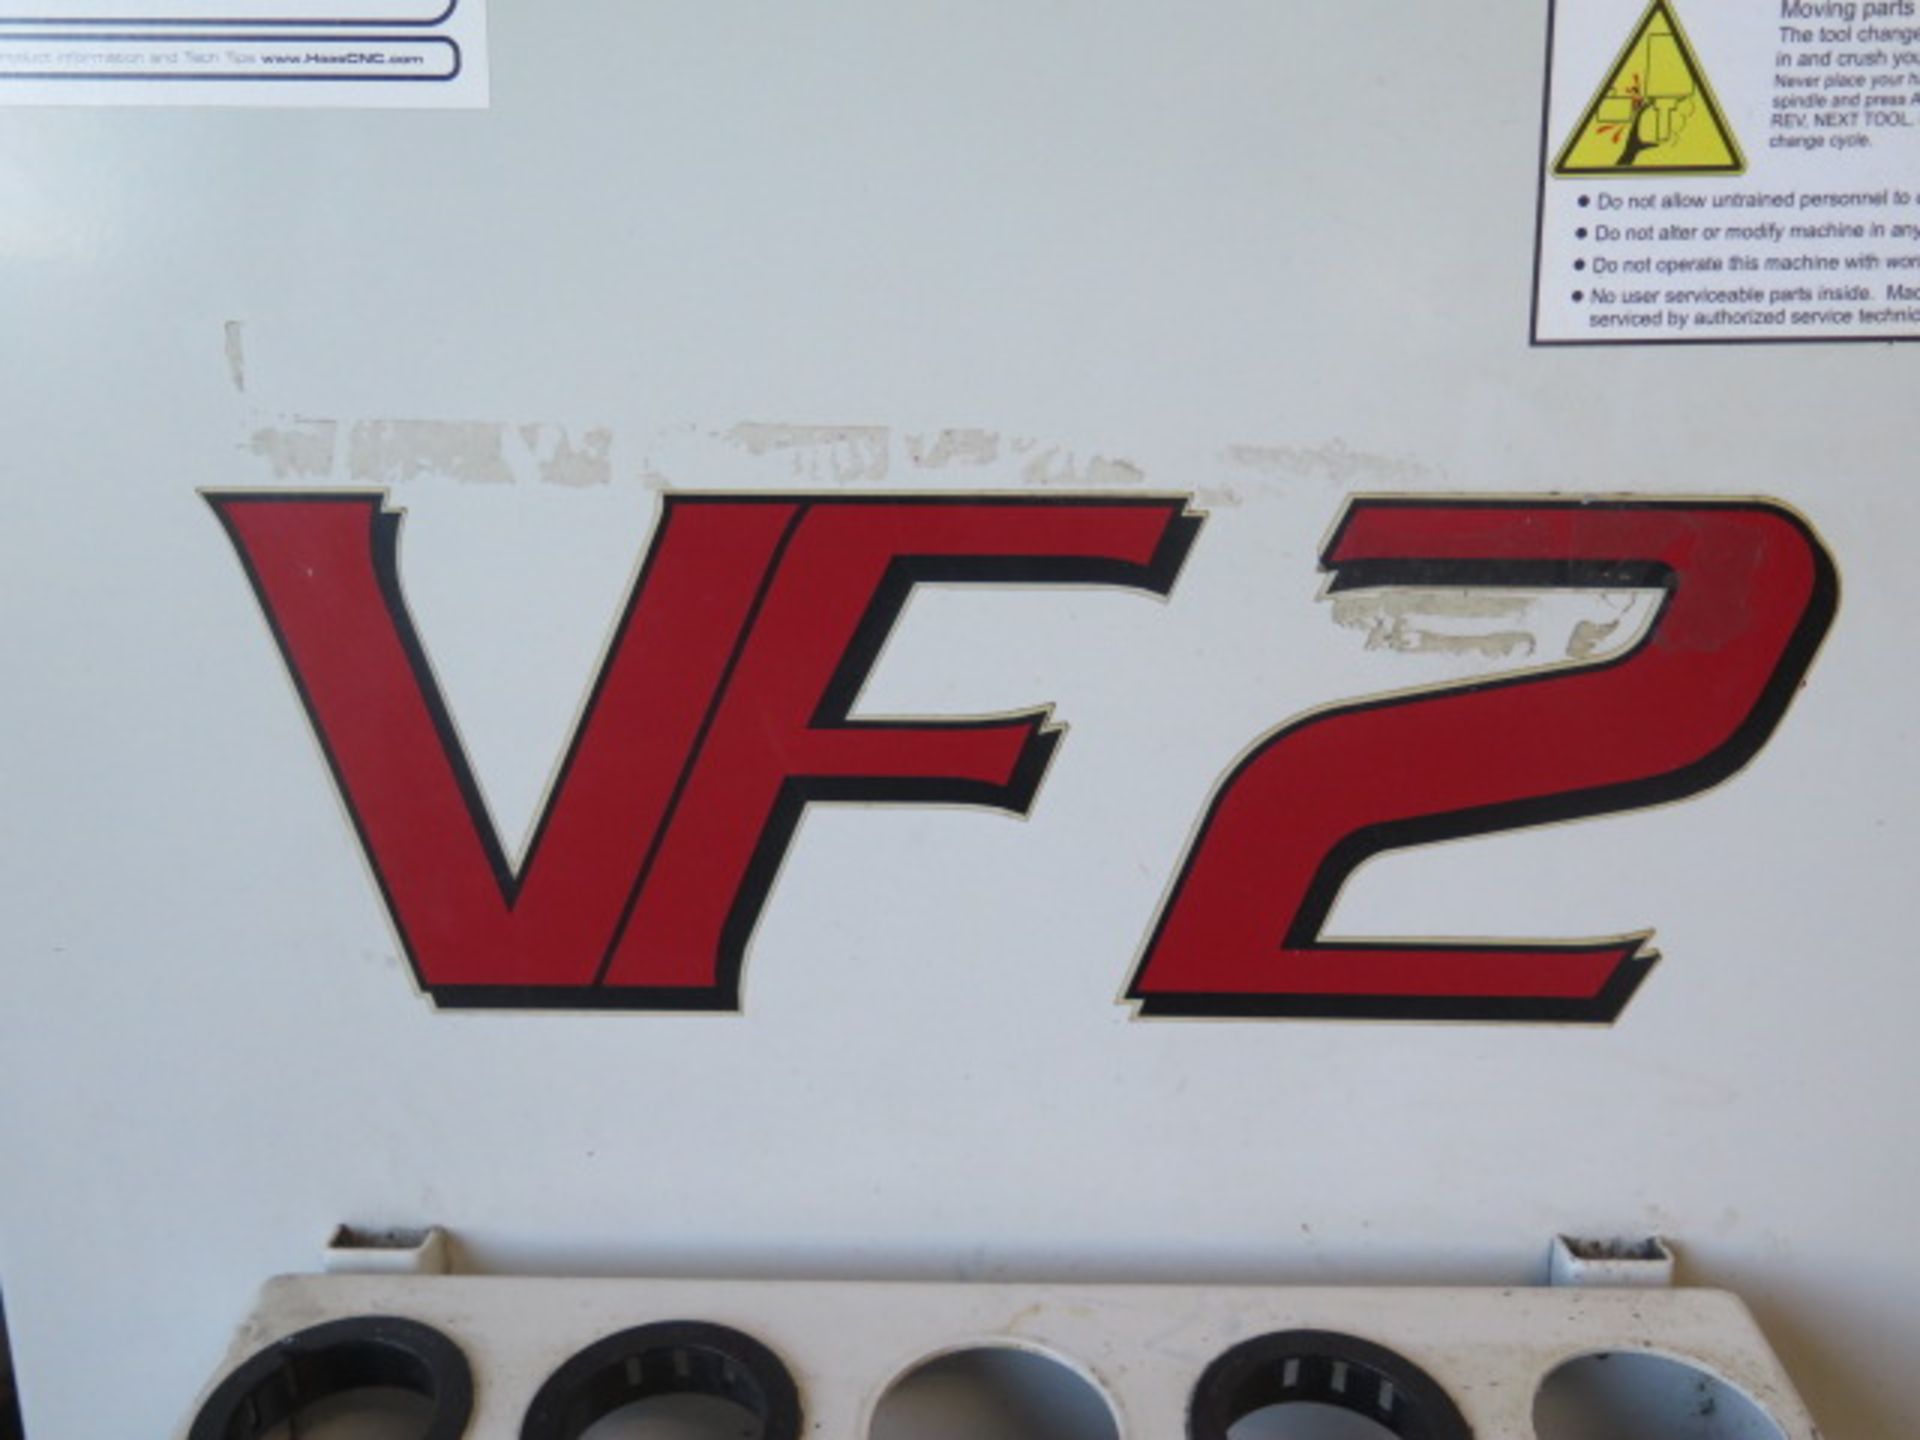 2001 Haas VF-2D 5-Axis Capable CNC VMC s/n 27266 w/ Haas Controls, 20 ATC, SOLD AS IS - Image 13 of 14